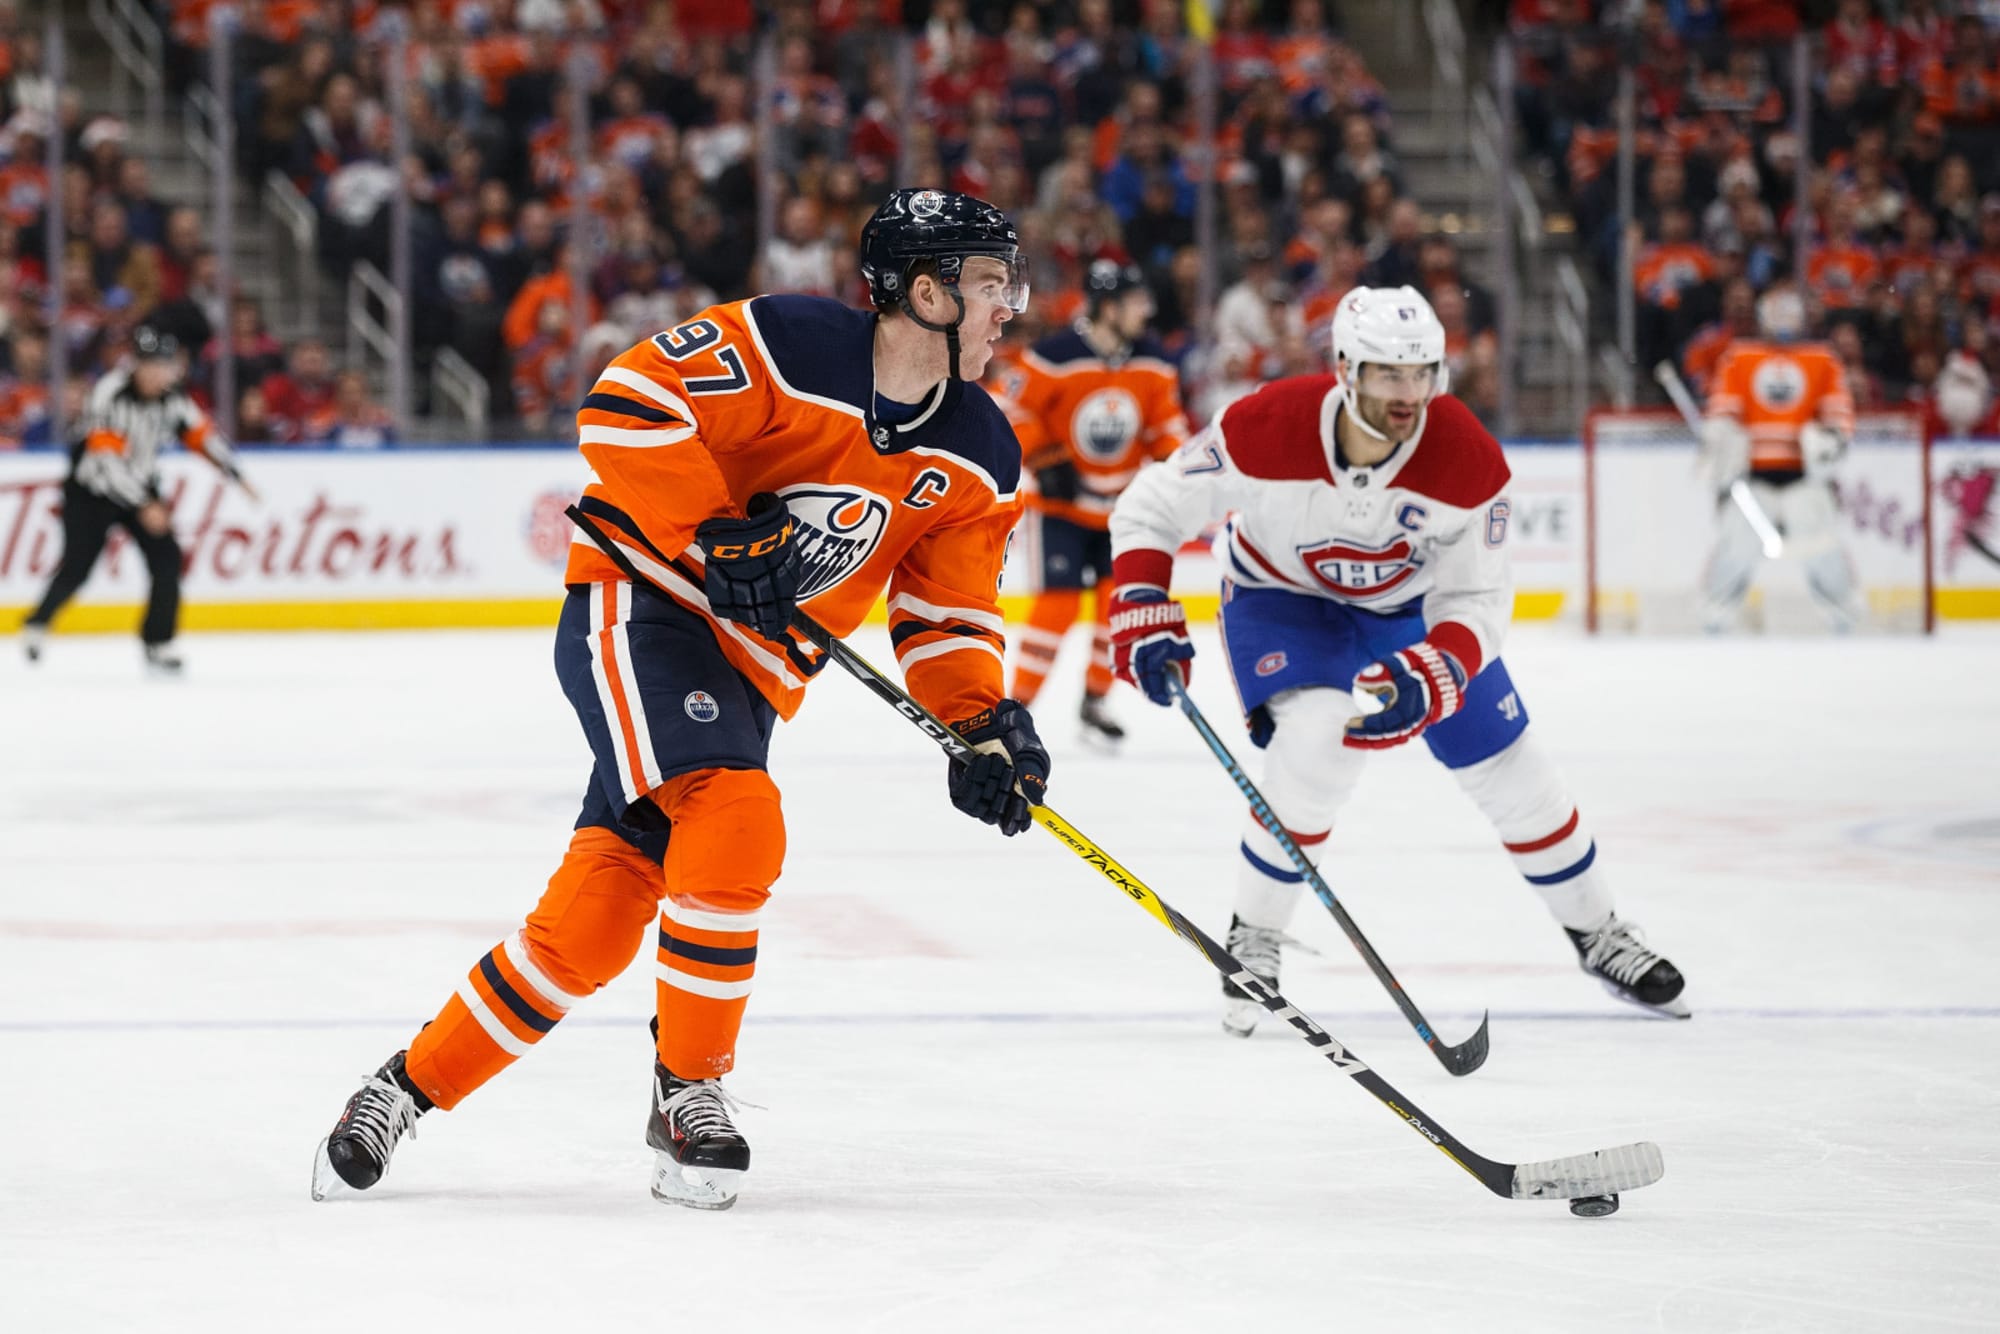 Montreal Canadiens Comparisons to the Edmonton Oilers continue